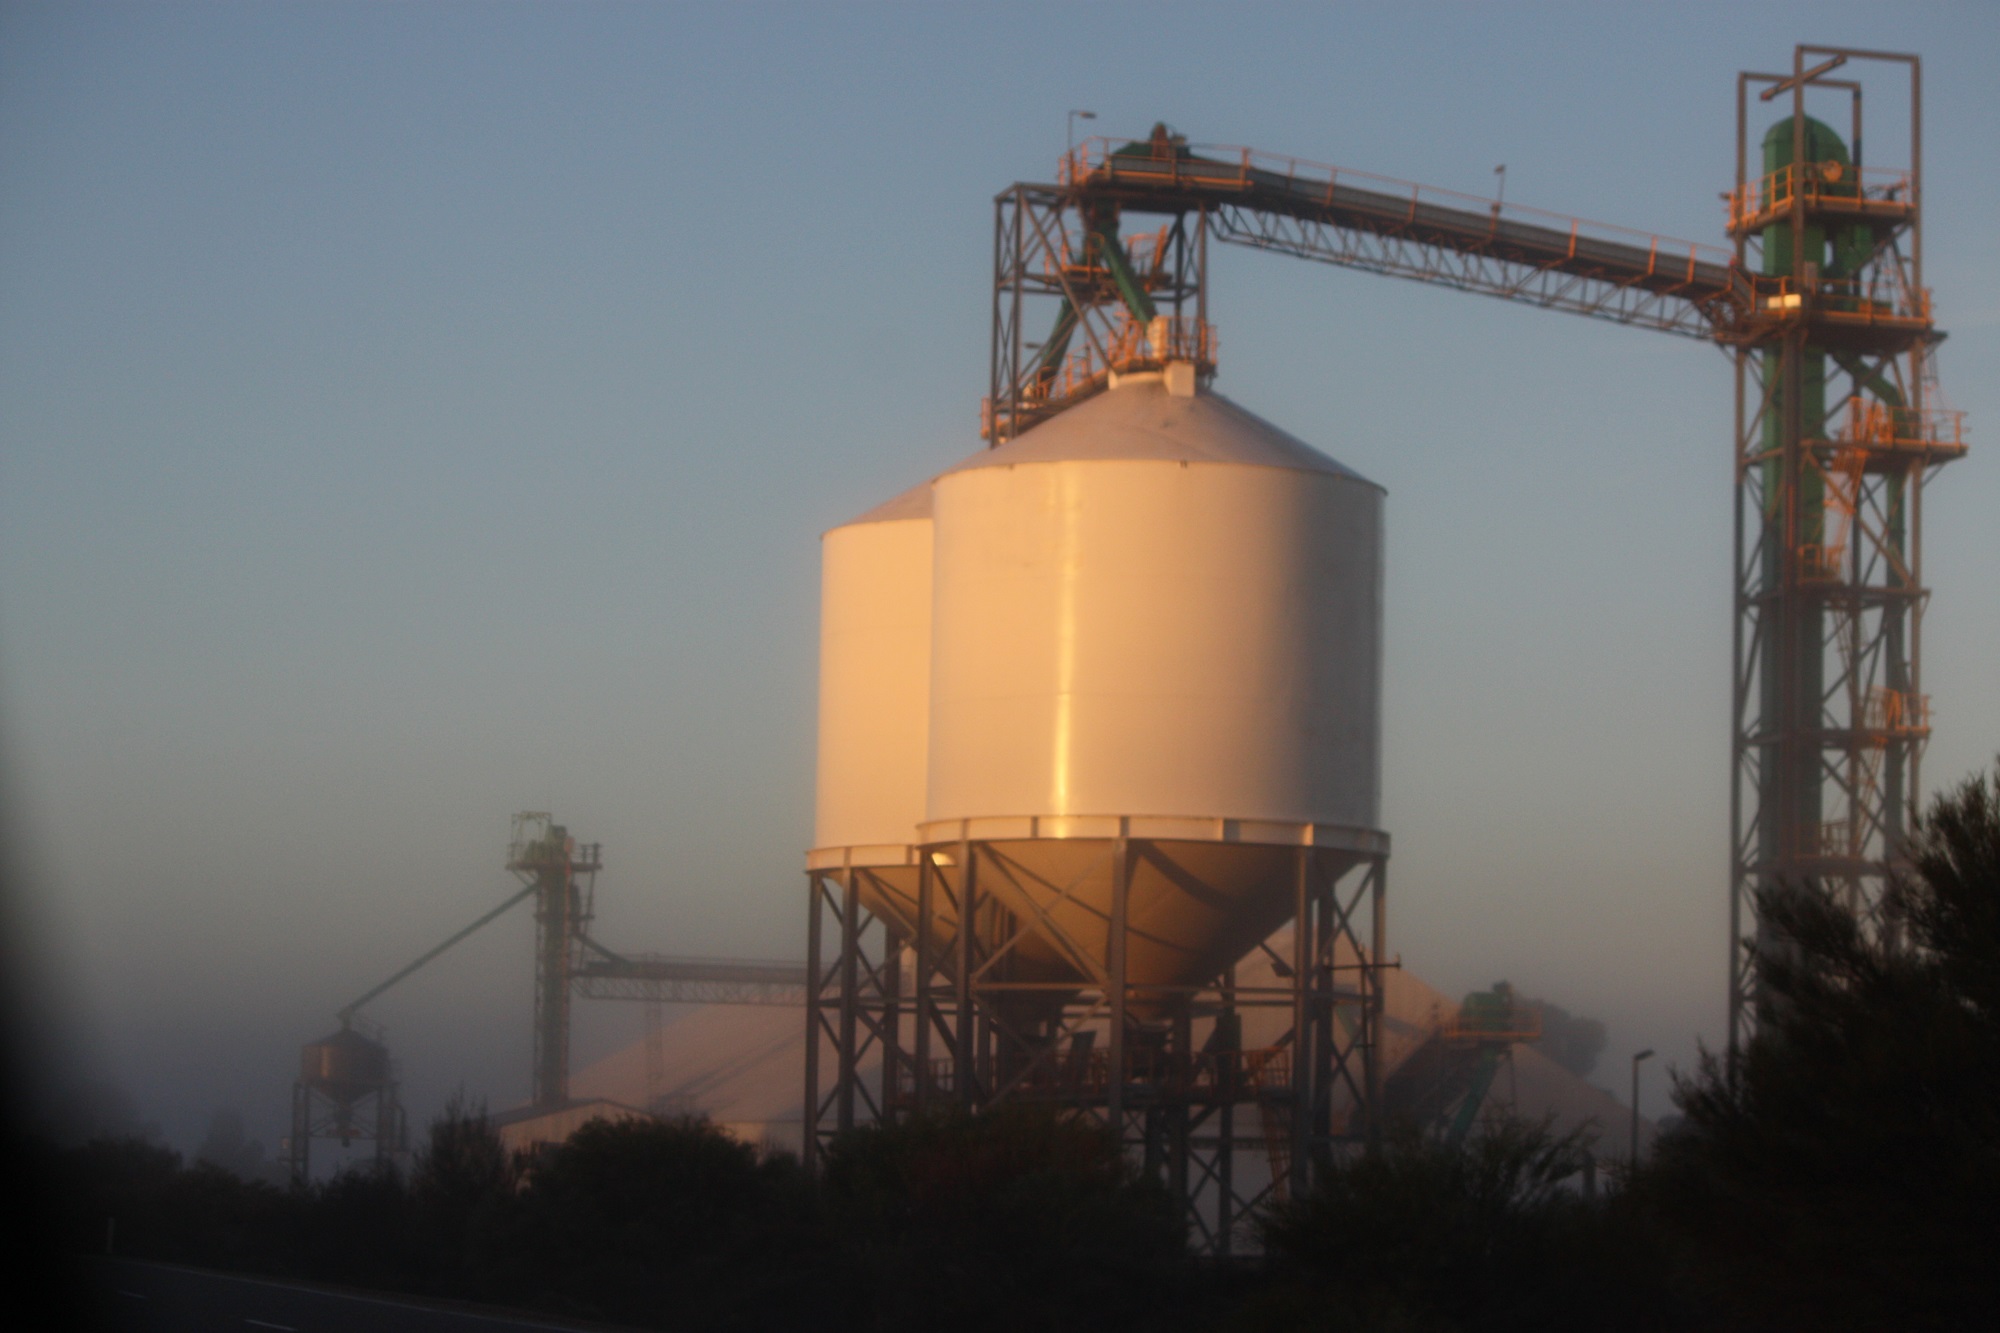 Two silos at CBH receival site at dusk.